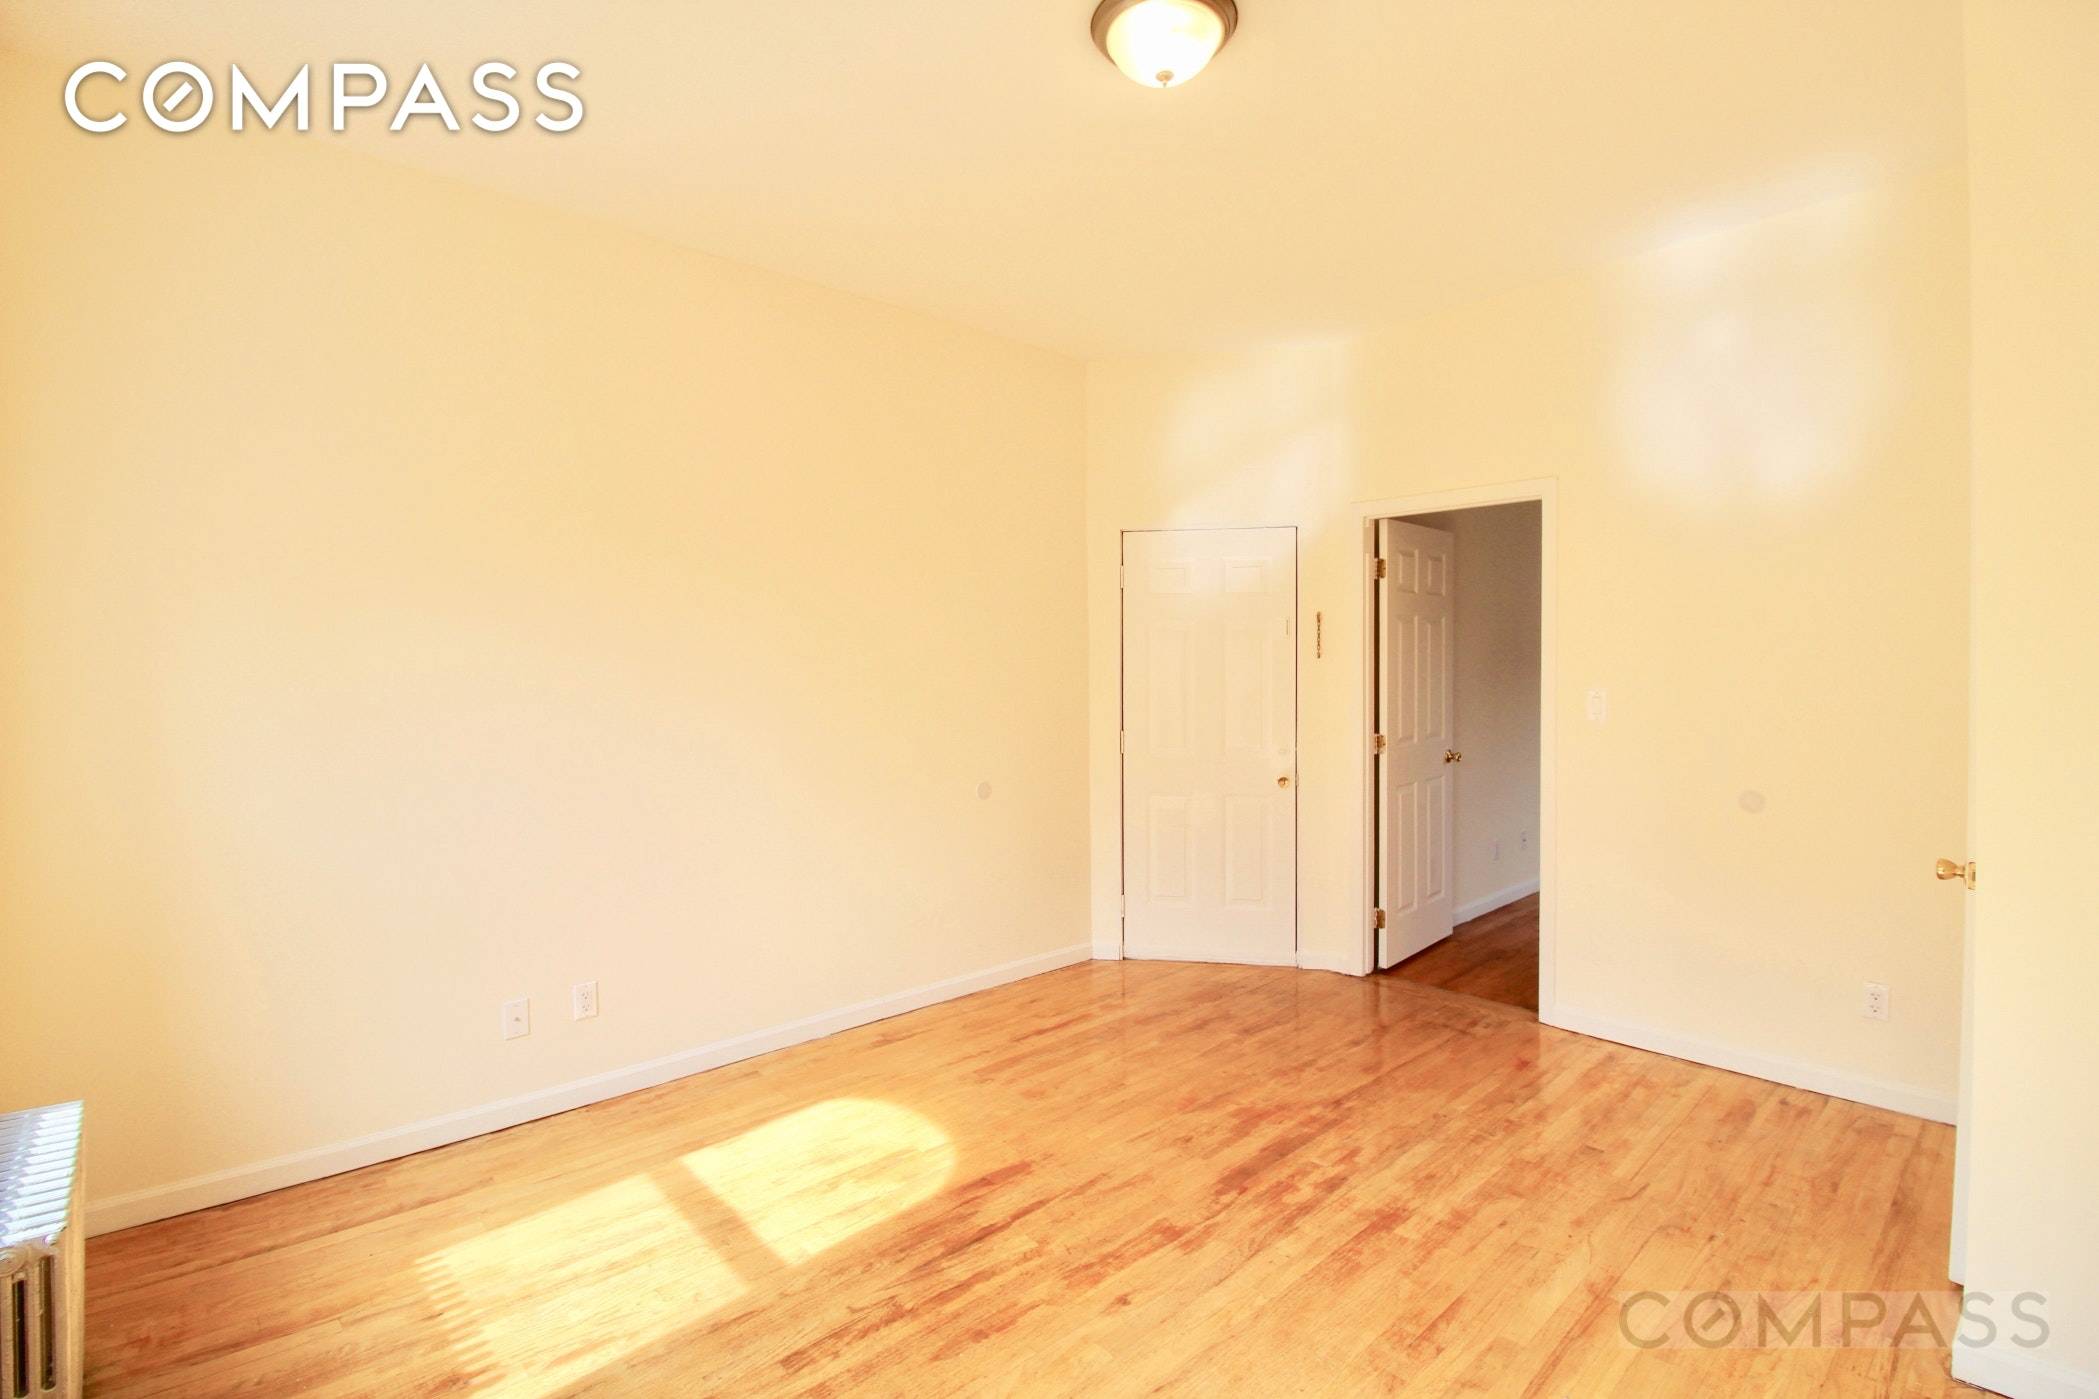 The apartment This beautiful sundrenched apartment is located in a perfect maintained townhouse in Prime Park Slope.